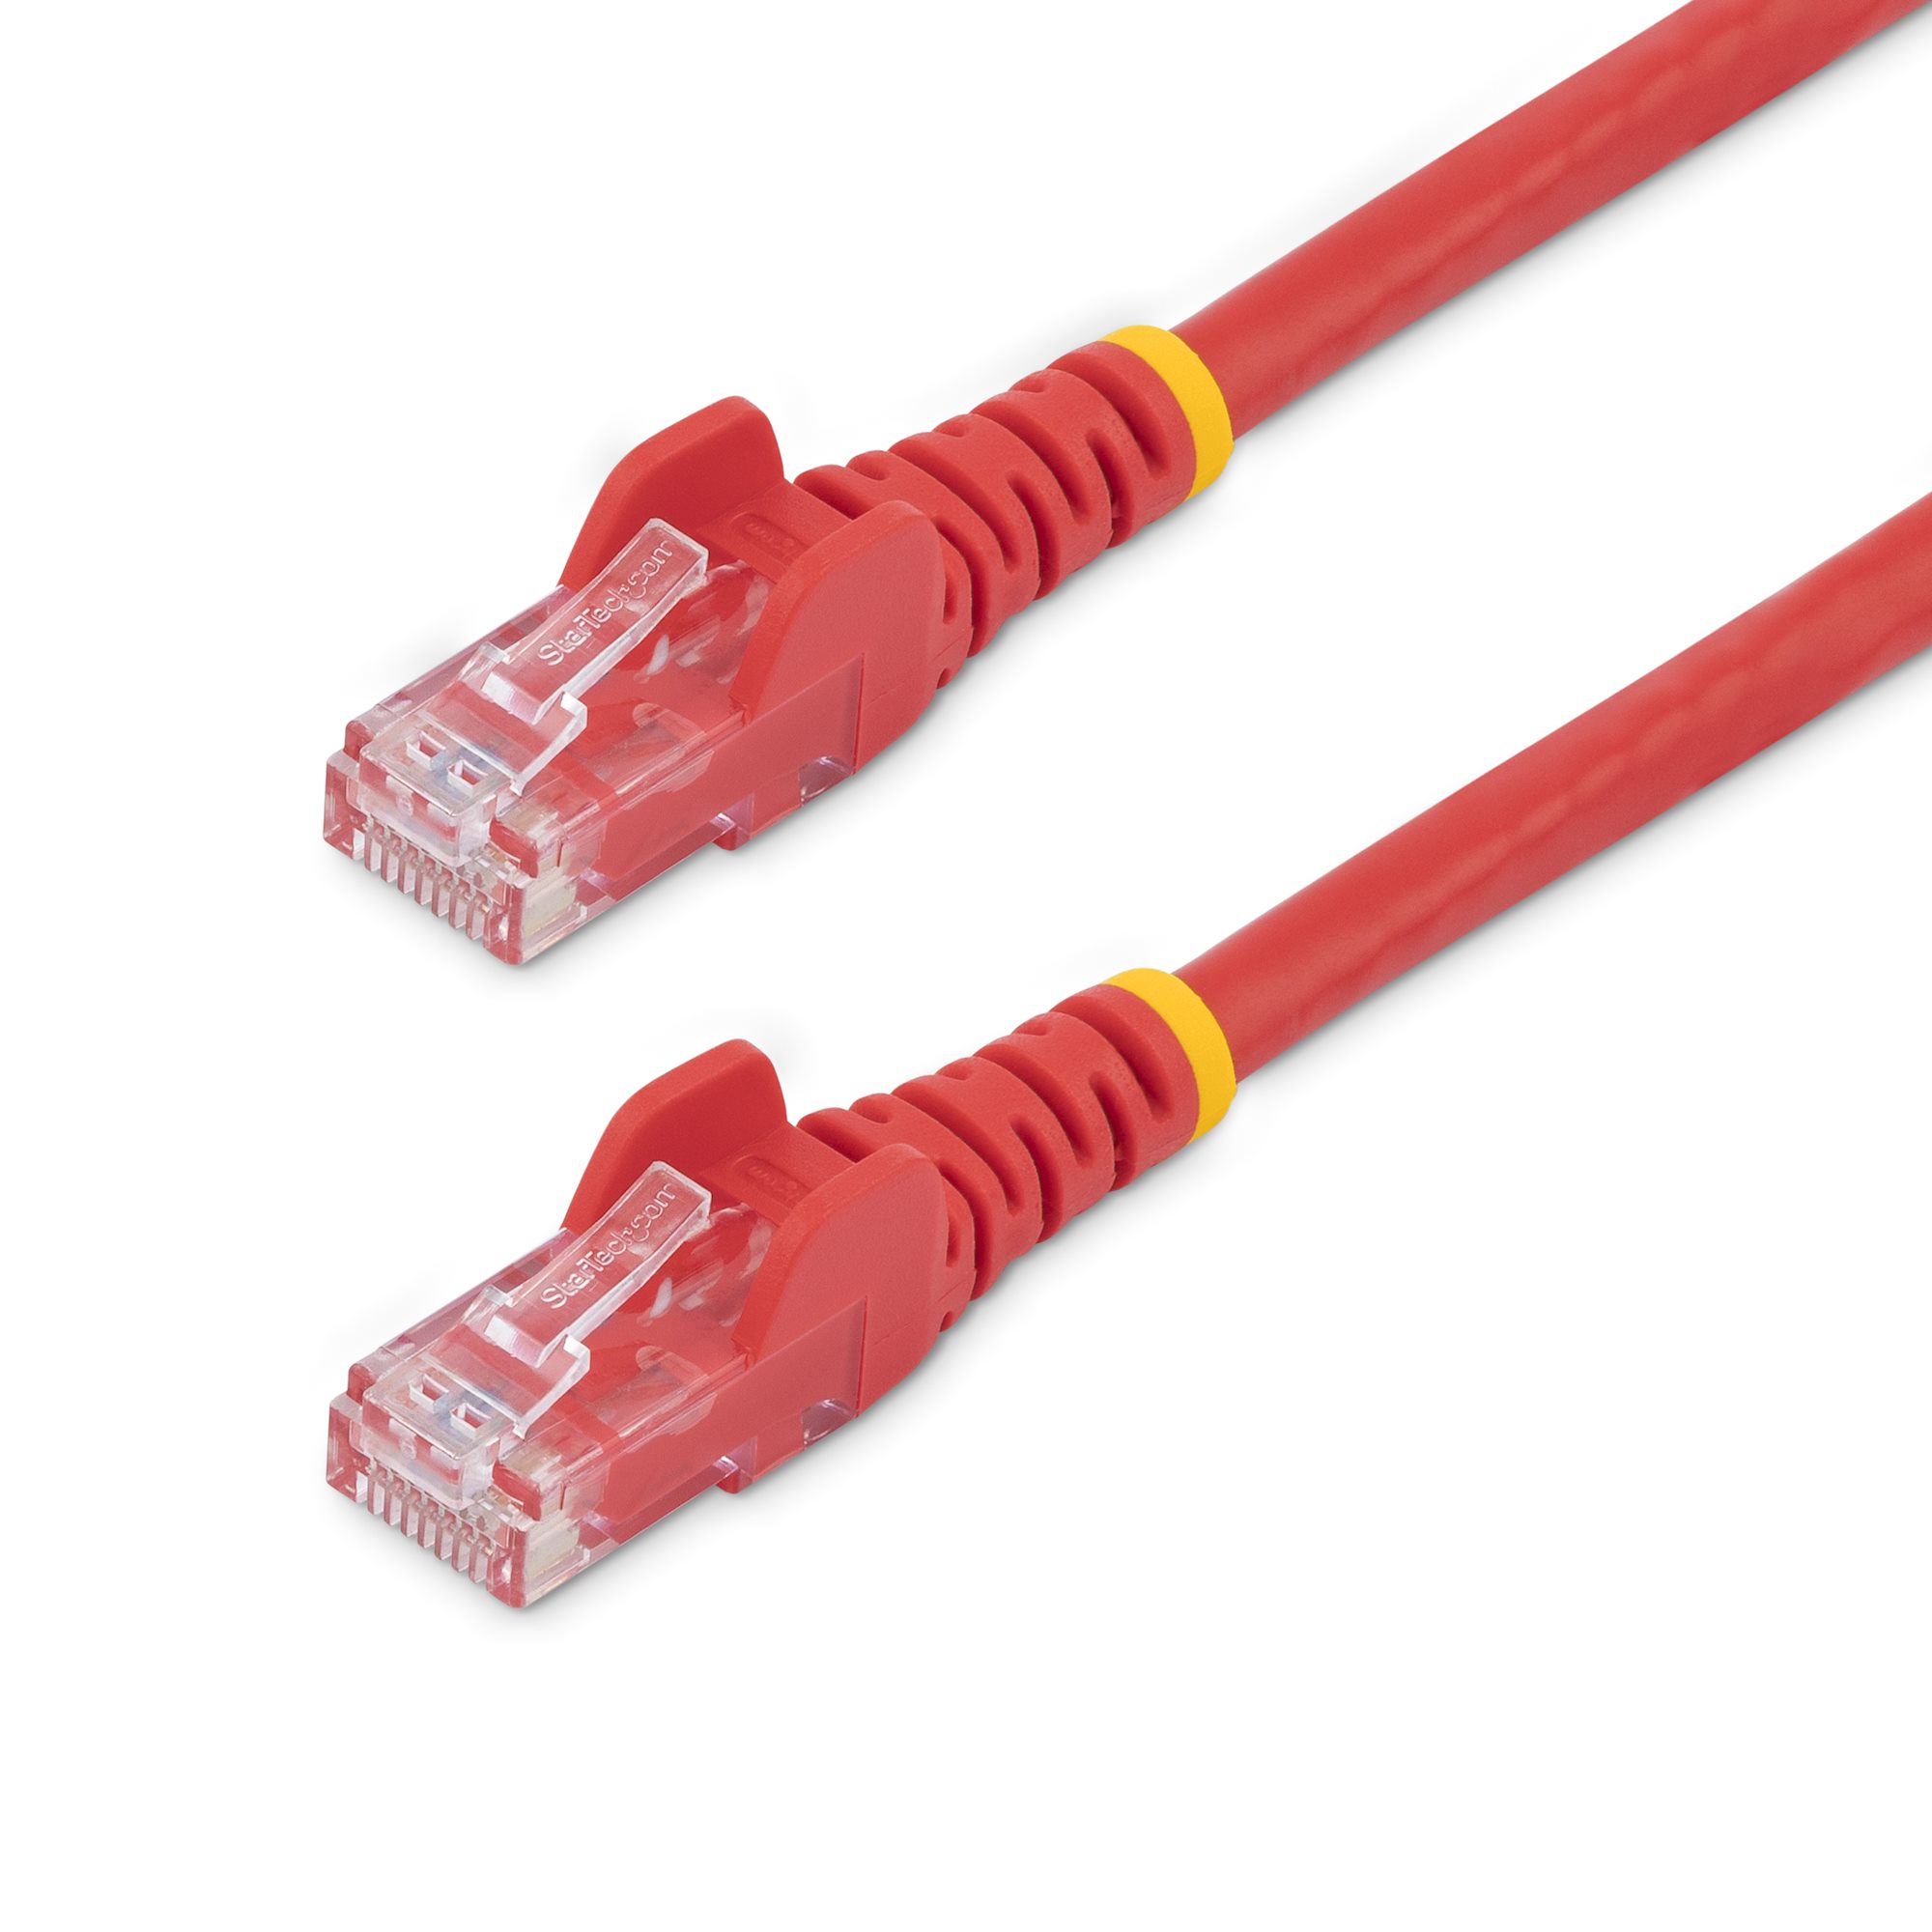 2m CAT6 Ethernet Cable - Red CAT 6 Gigabit Ethernet Wire -650MHz 100W PoE  RJ45 UTP Network/Patch Cord Snagless w/Strain Relief Fluke Tested/Wiring is